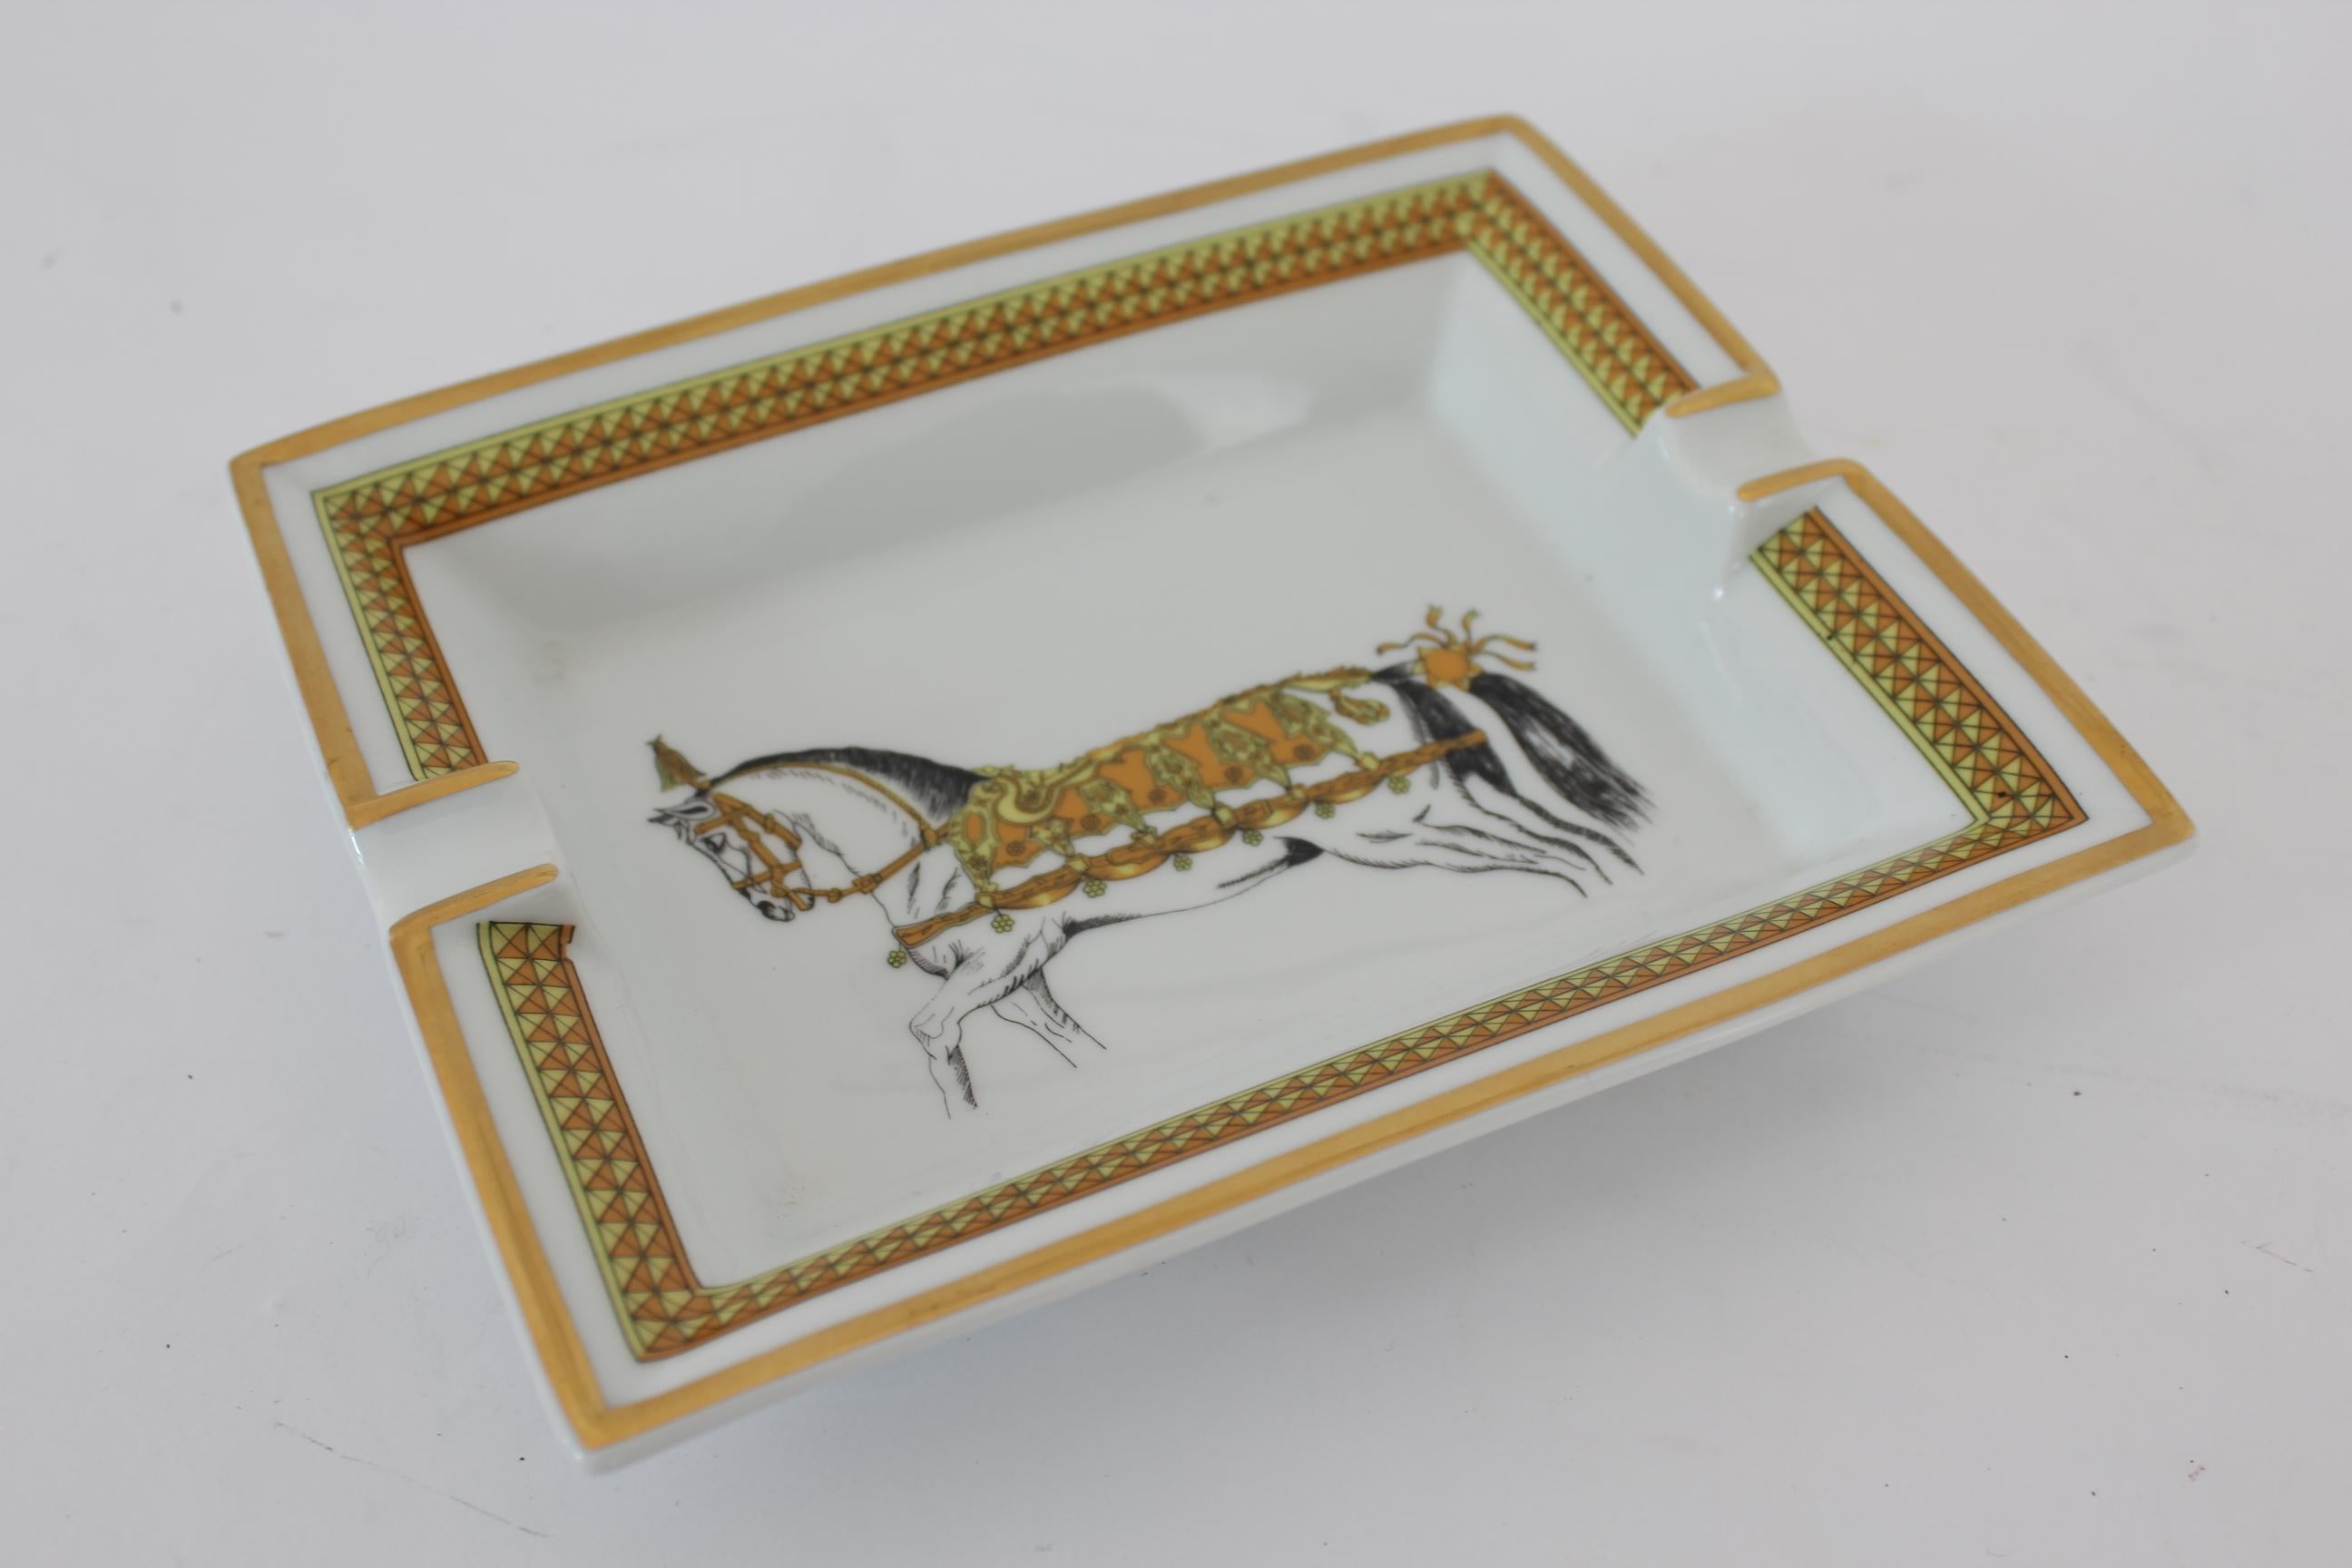 Hermes vintage ashtray 90s. French porcelain, color white and gold with a horse depicted. On the bottom velvet of goat. Made in France. Excellent vintage conditions.

Measures: 19 x 15.5 cm